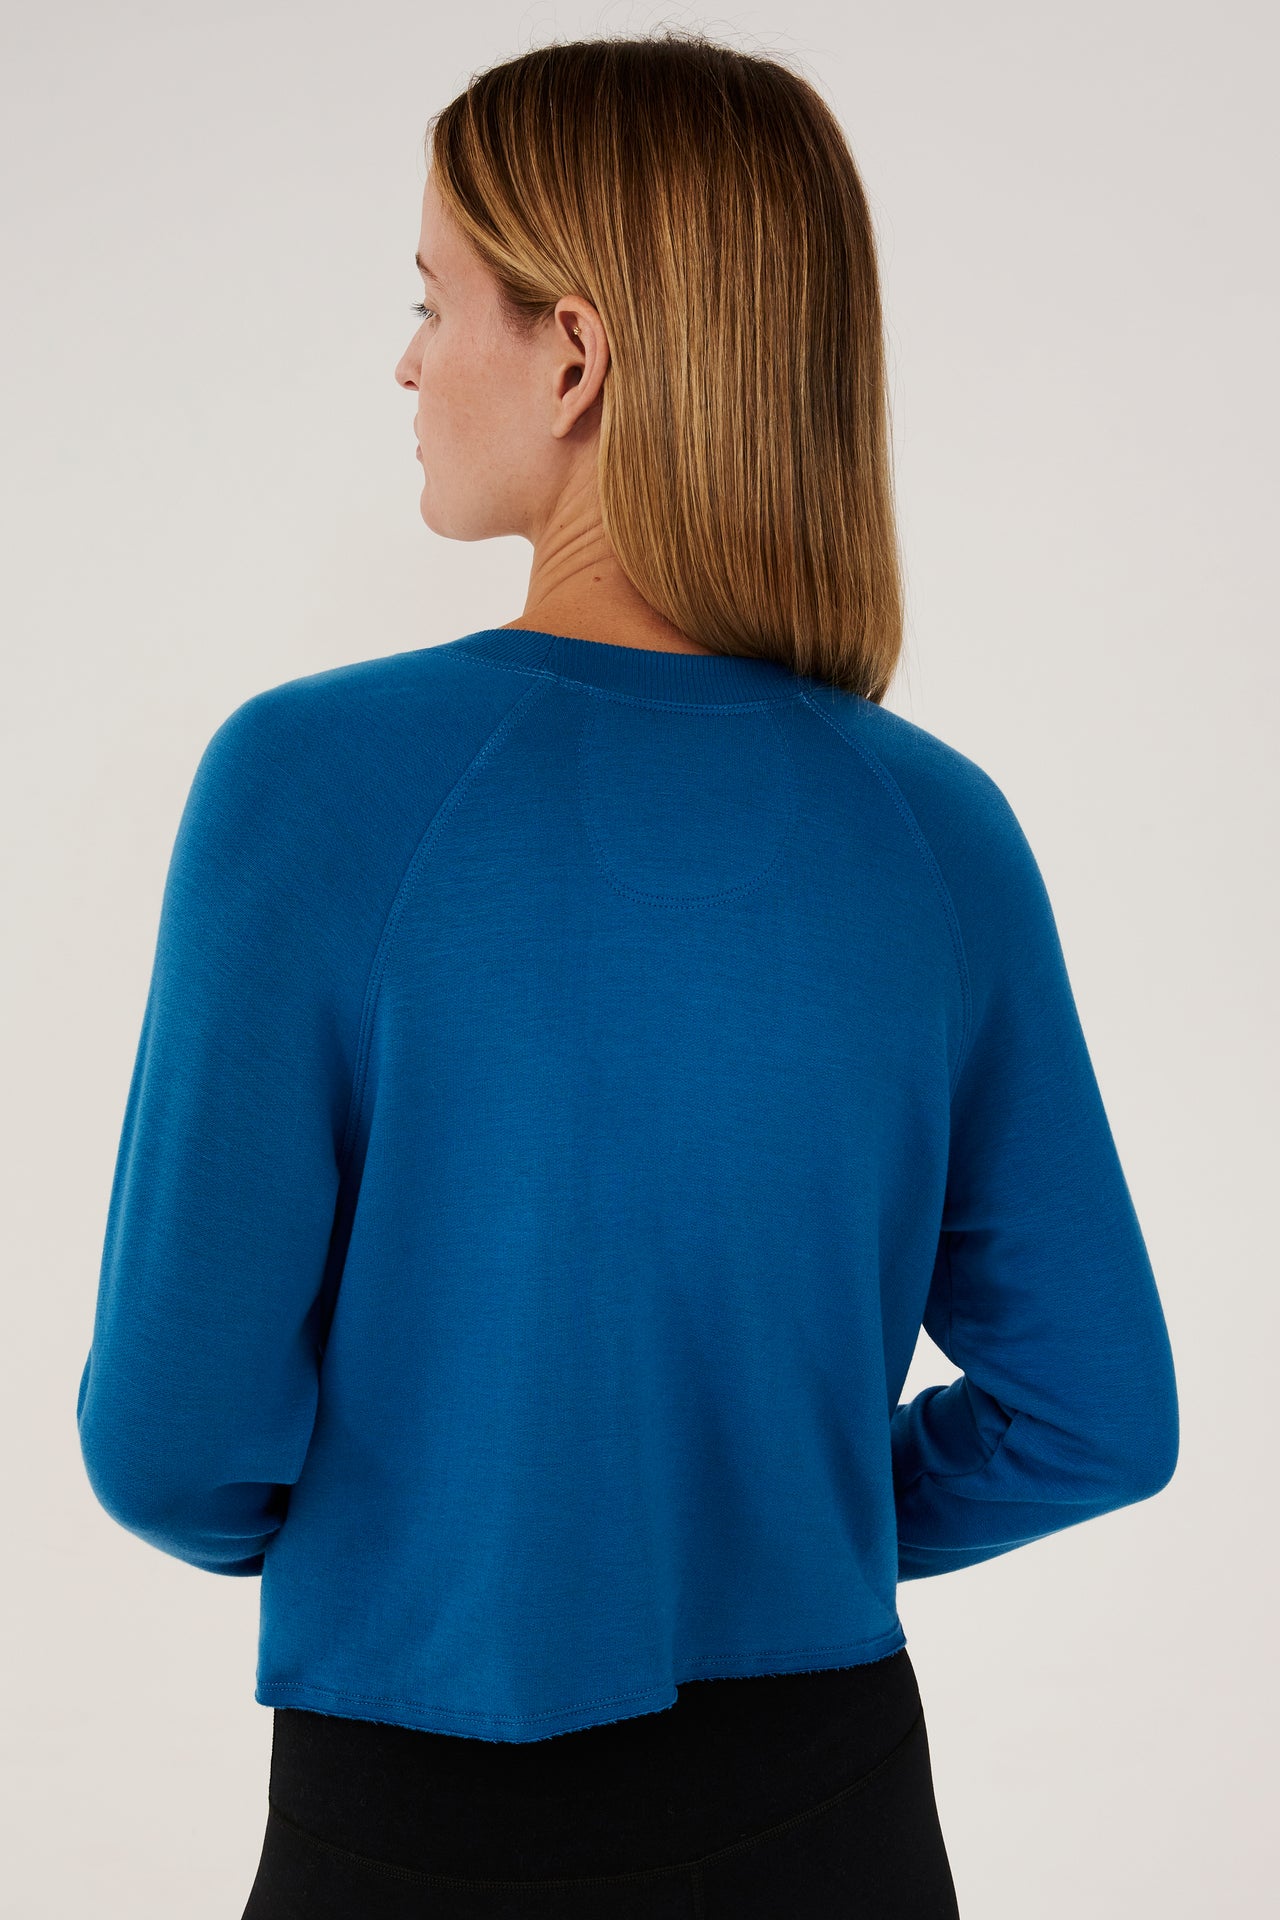 Back view of woman with dark blonde hair, wearing cropped  bright blue sweatshirt with black leggings